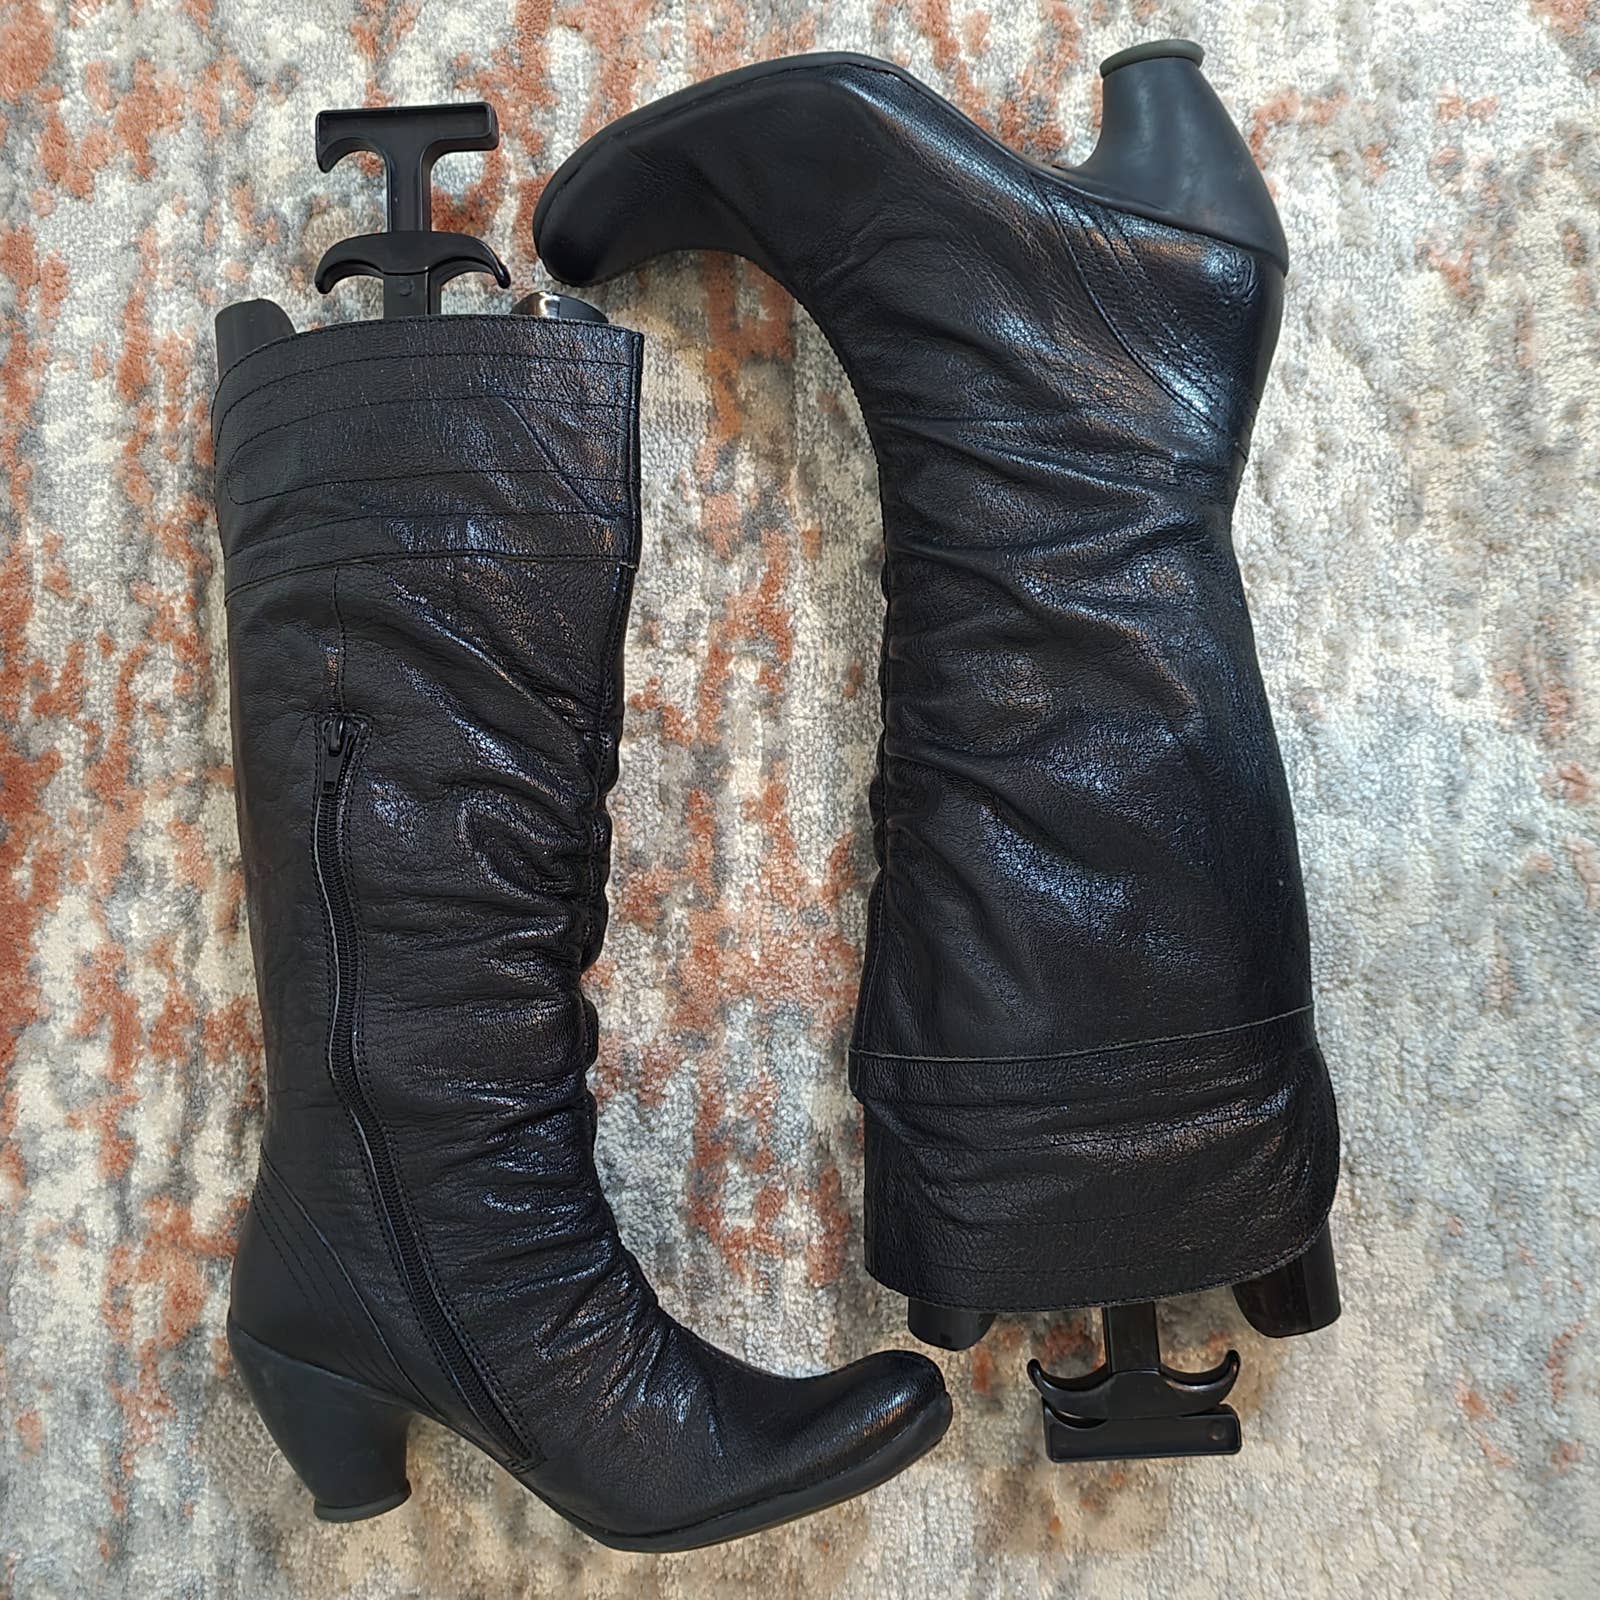 Fly London Black Leather Rouched Front Boots - Size 7.5Markita's ClosetFLY London